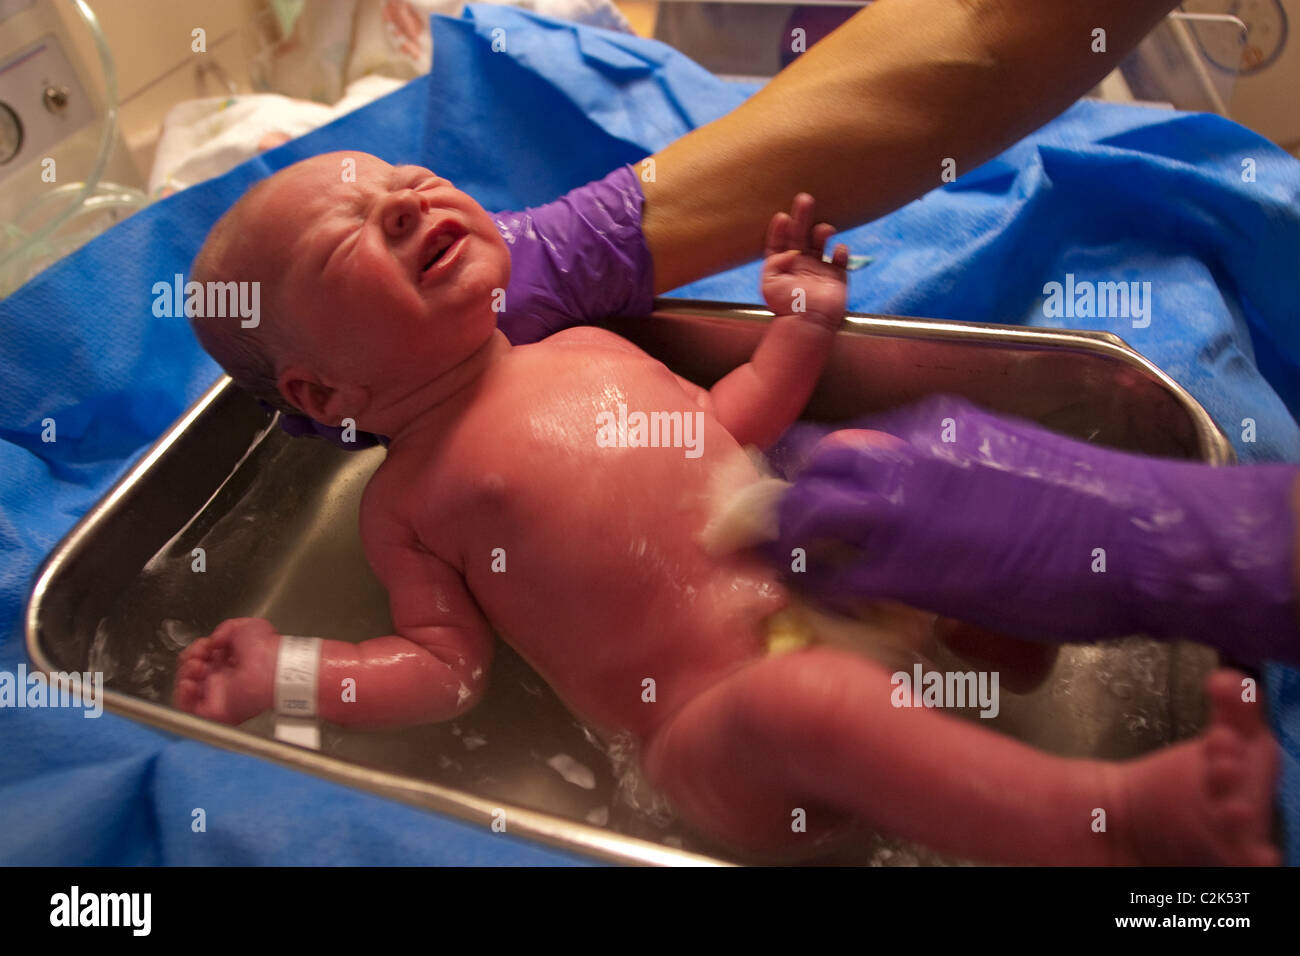 A new born baby boy gets a bath in his first minutes of life. Stock Photo